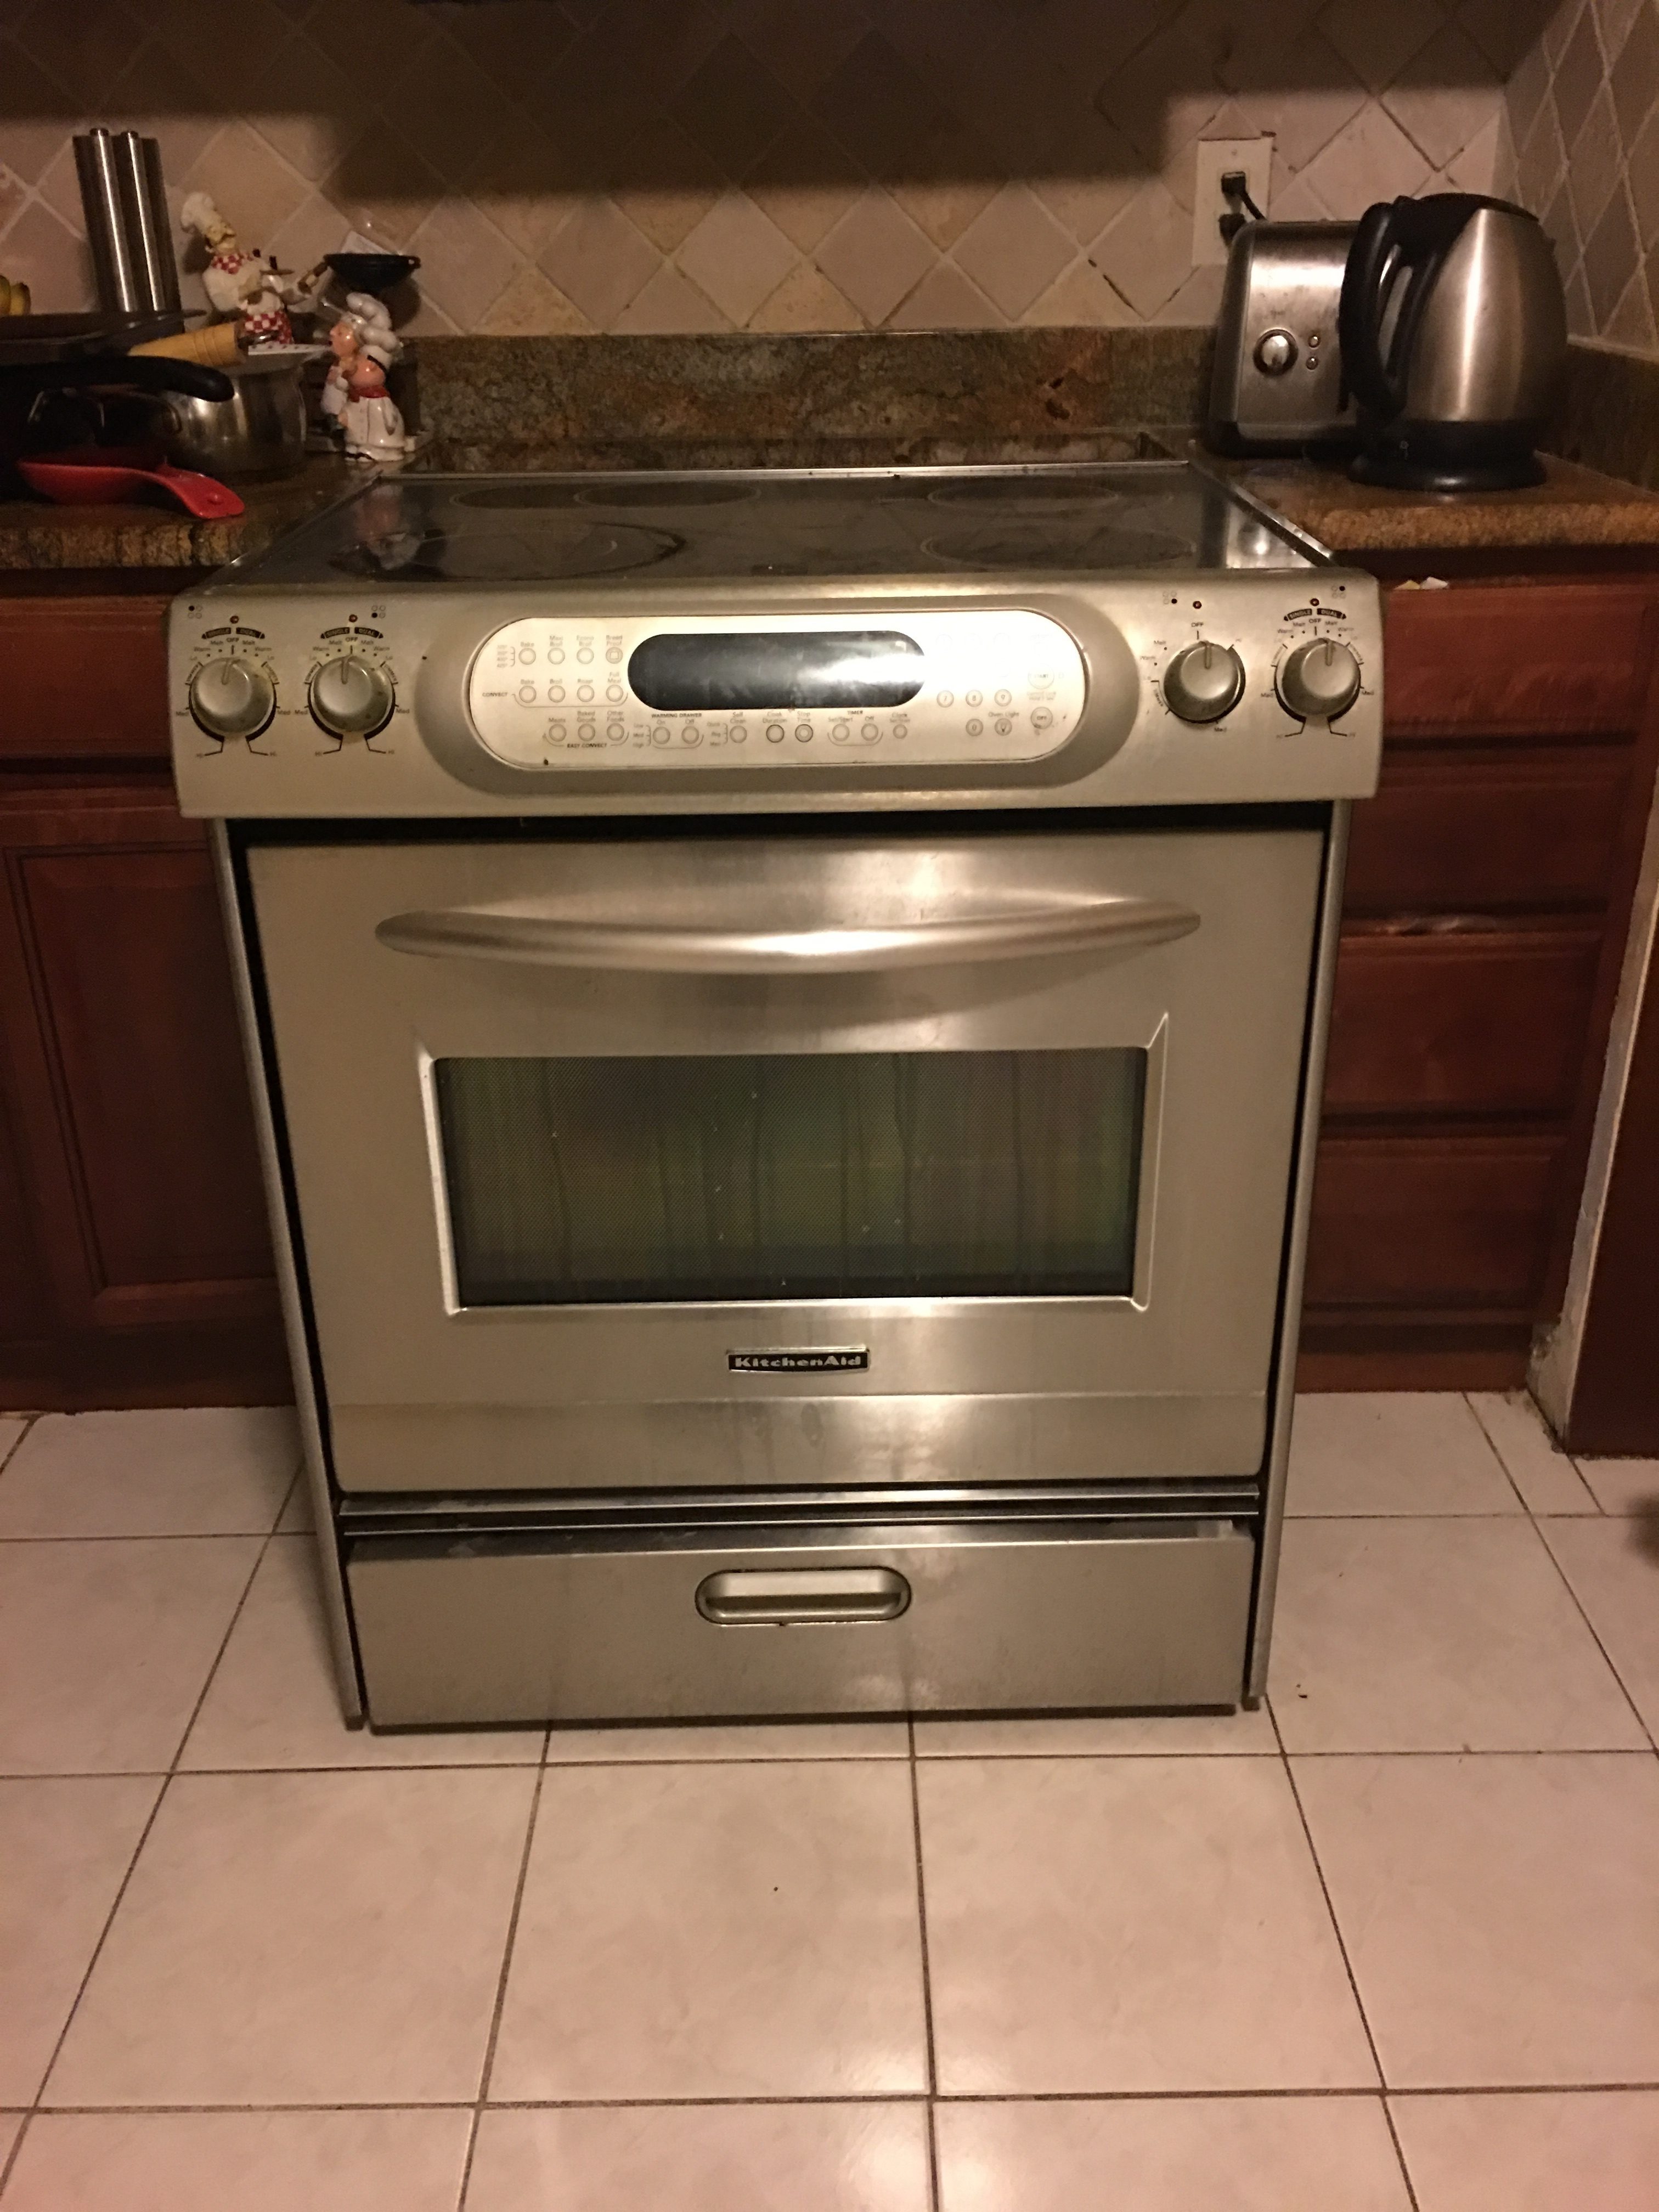 Top 809 Complaints and Reviews about KitchenAid Stoves & Ovens